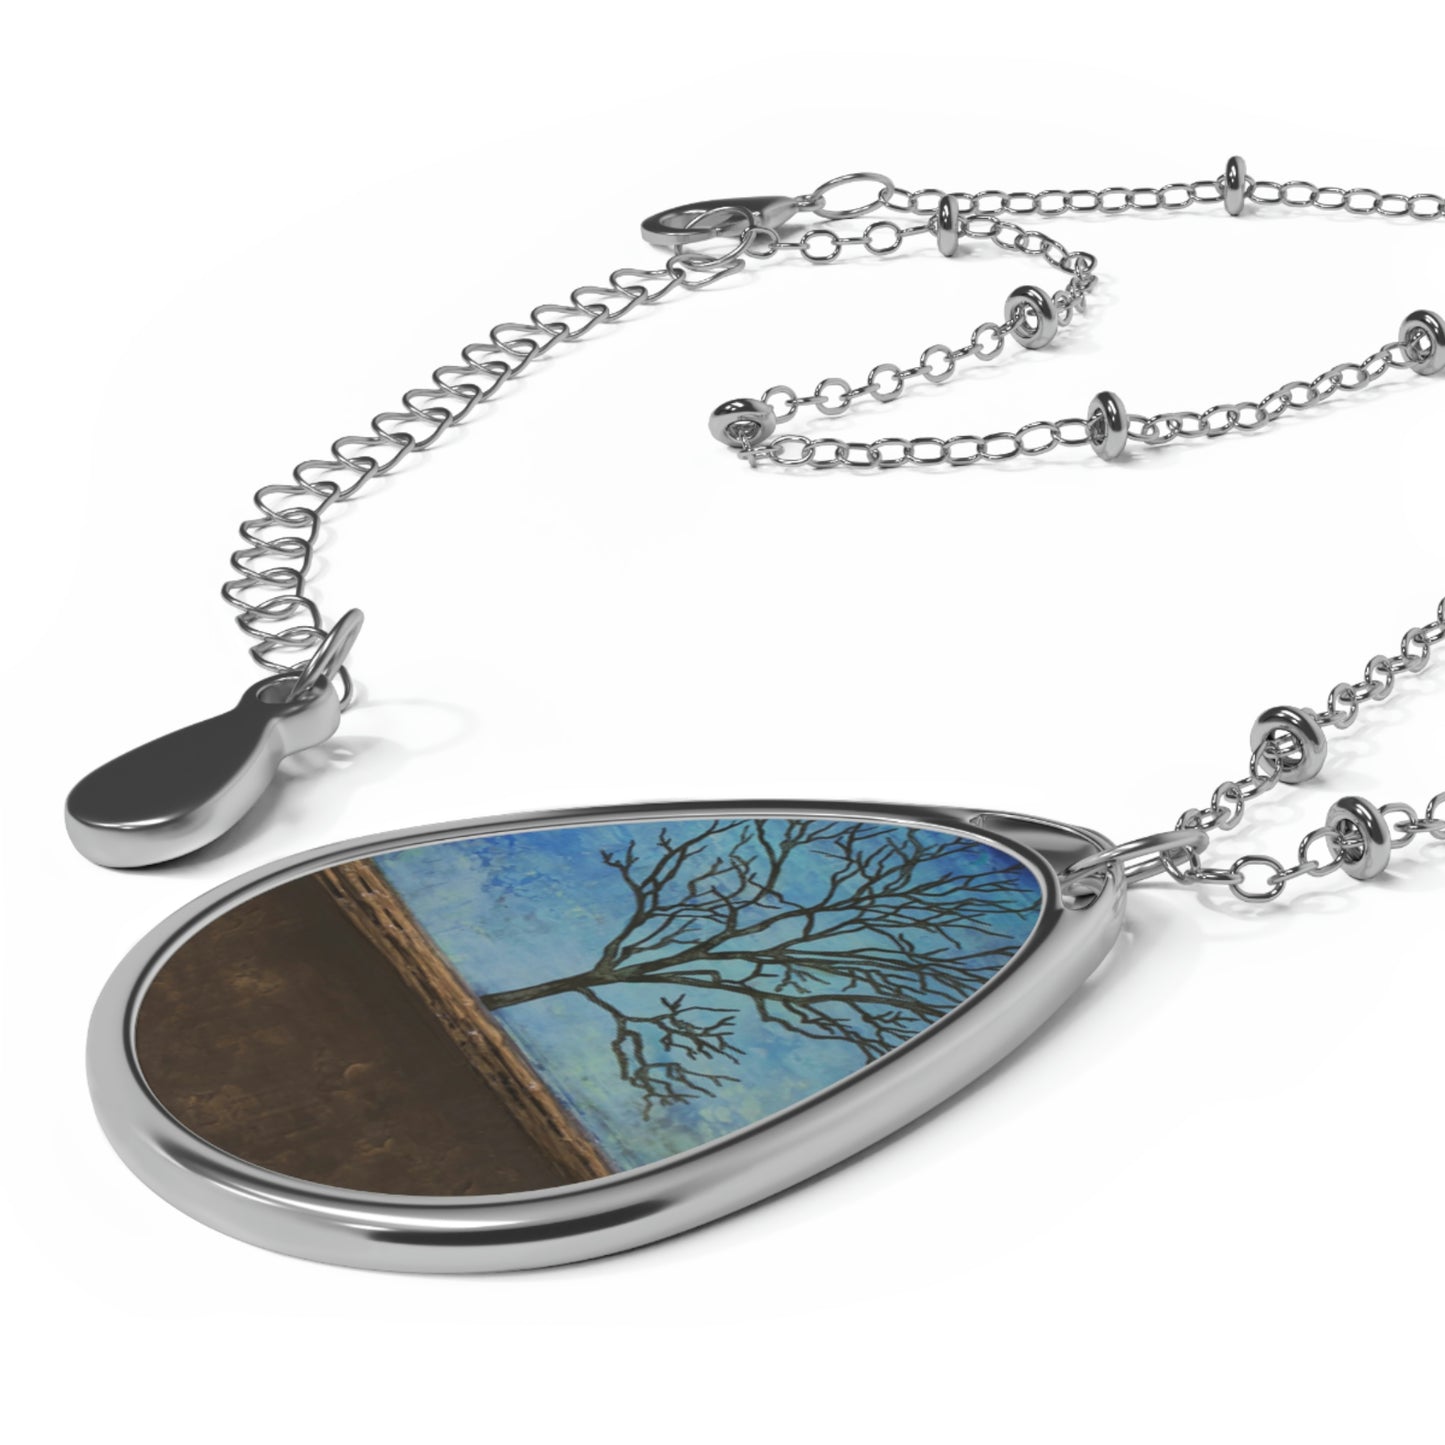 Art Necklace - Dark and Stormy